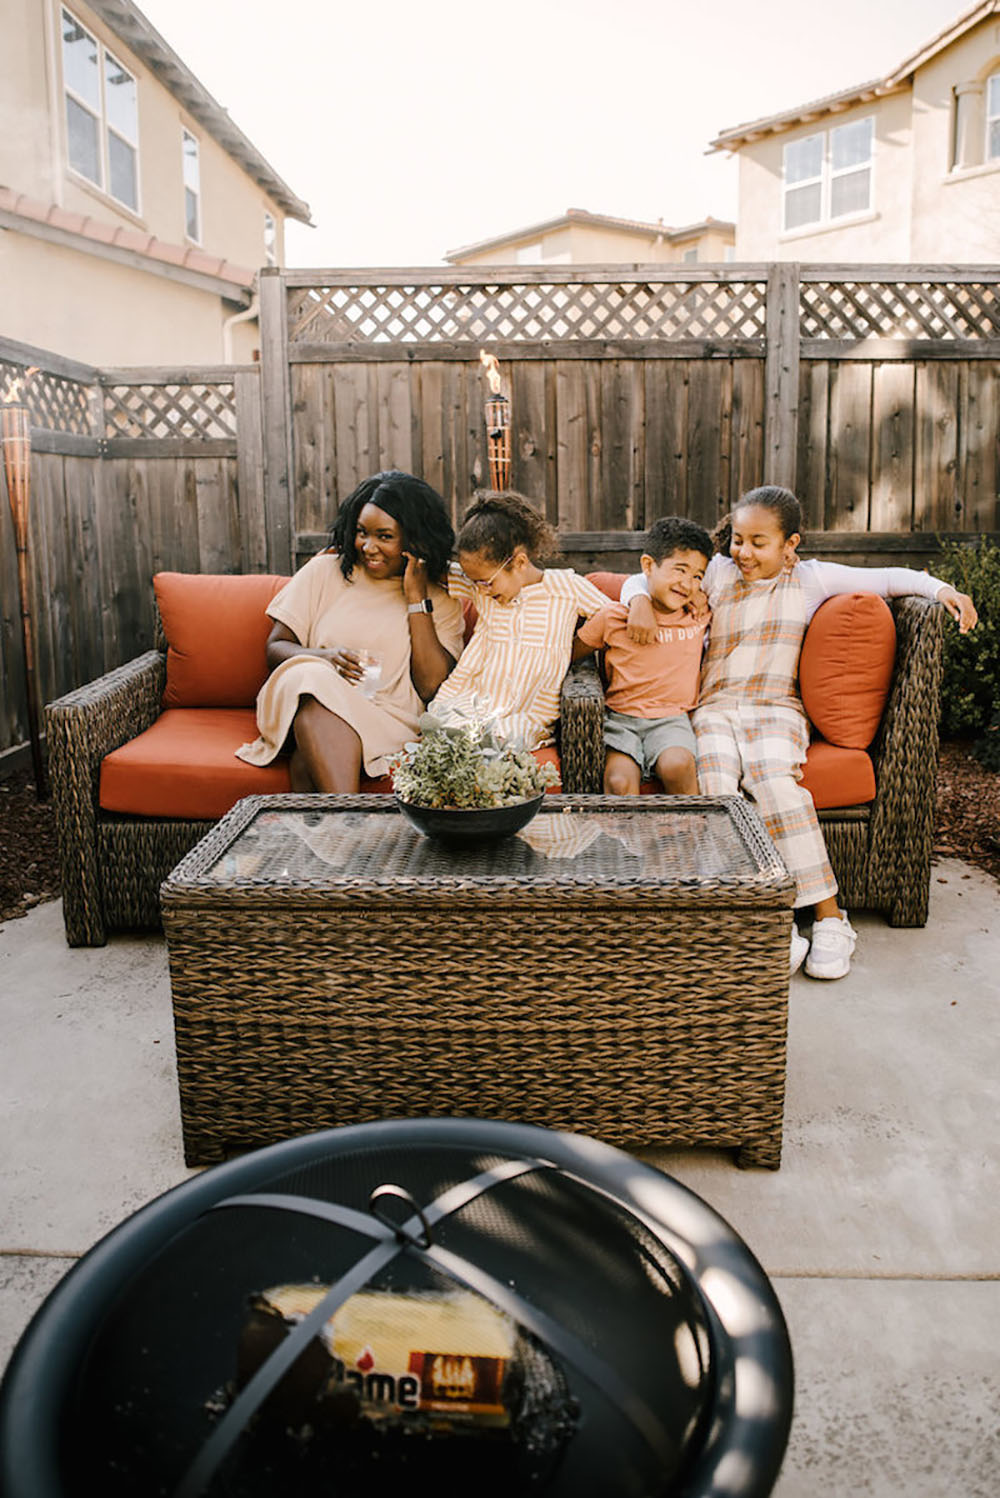 A woman and three children sit on a wicker patio set with bright cushions.